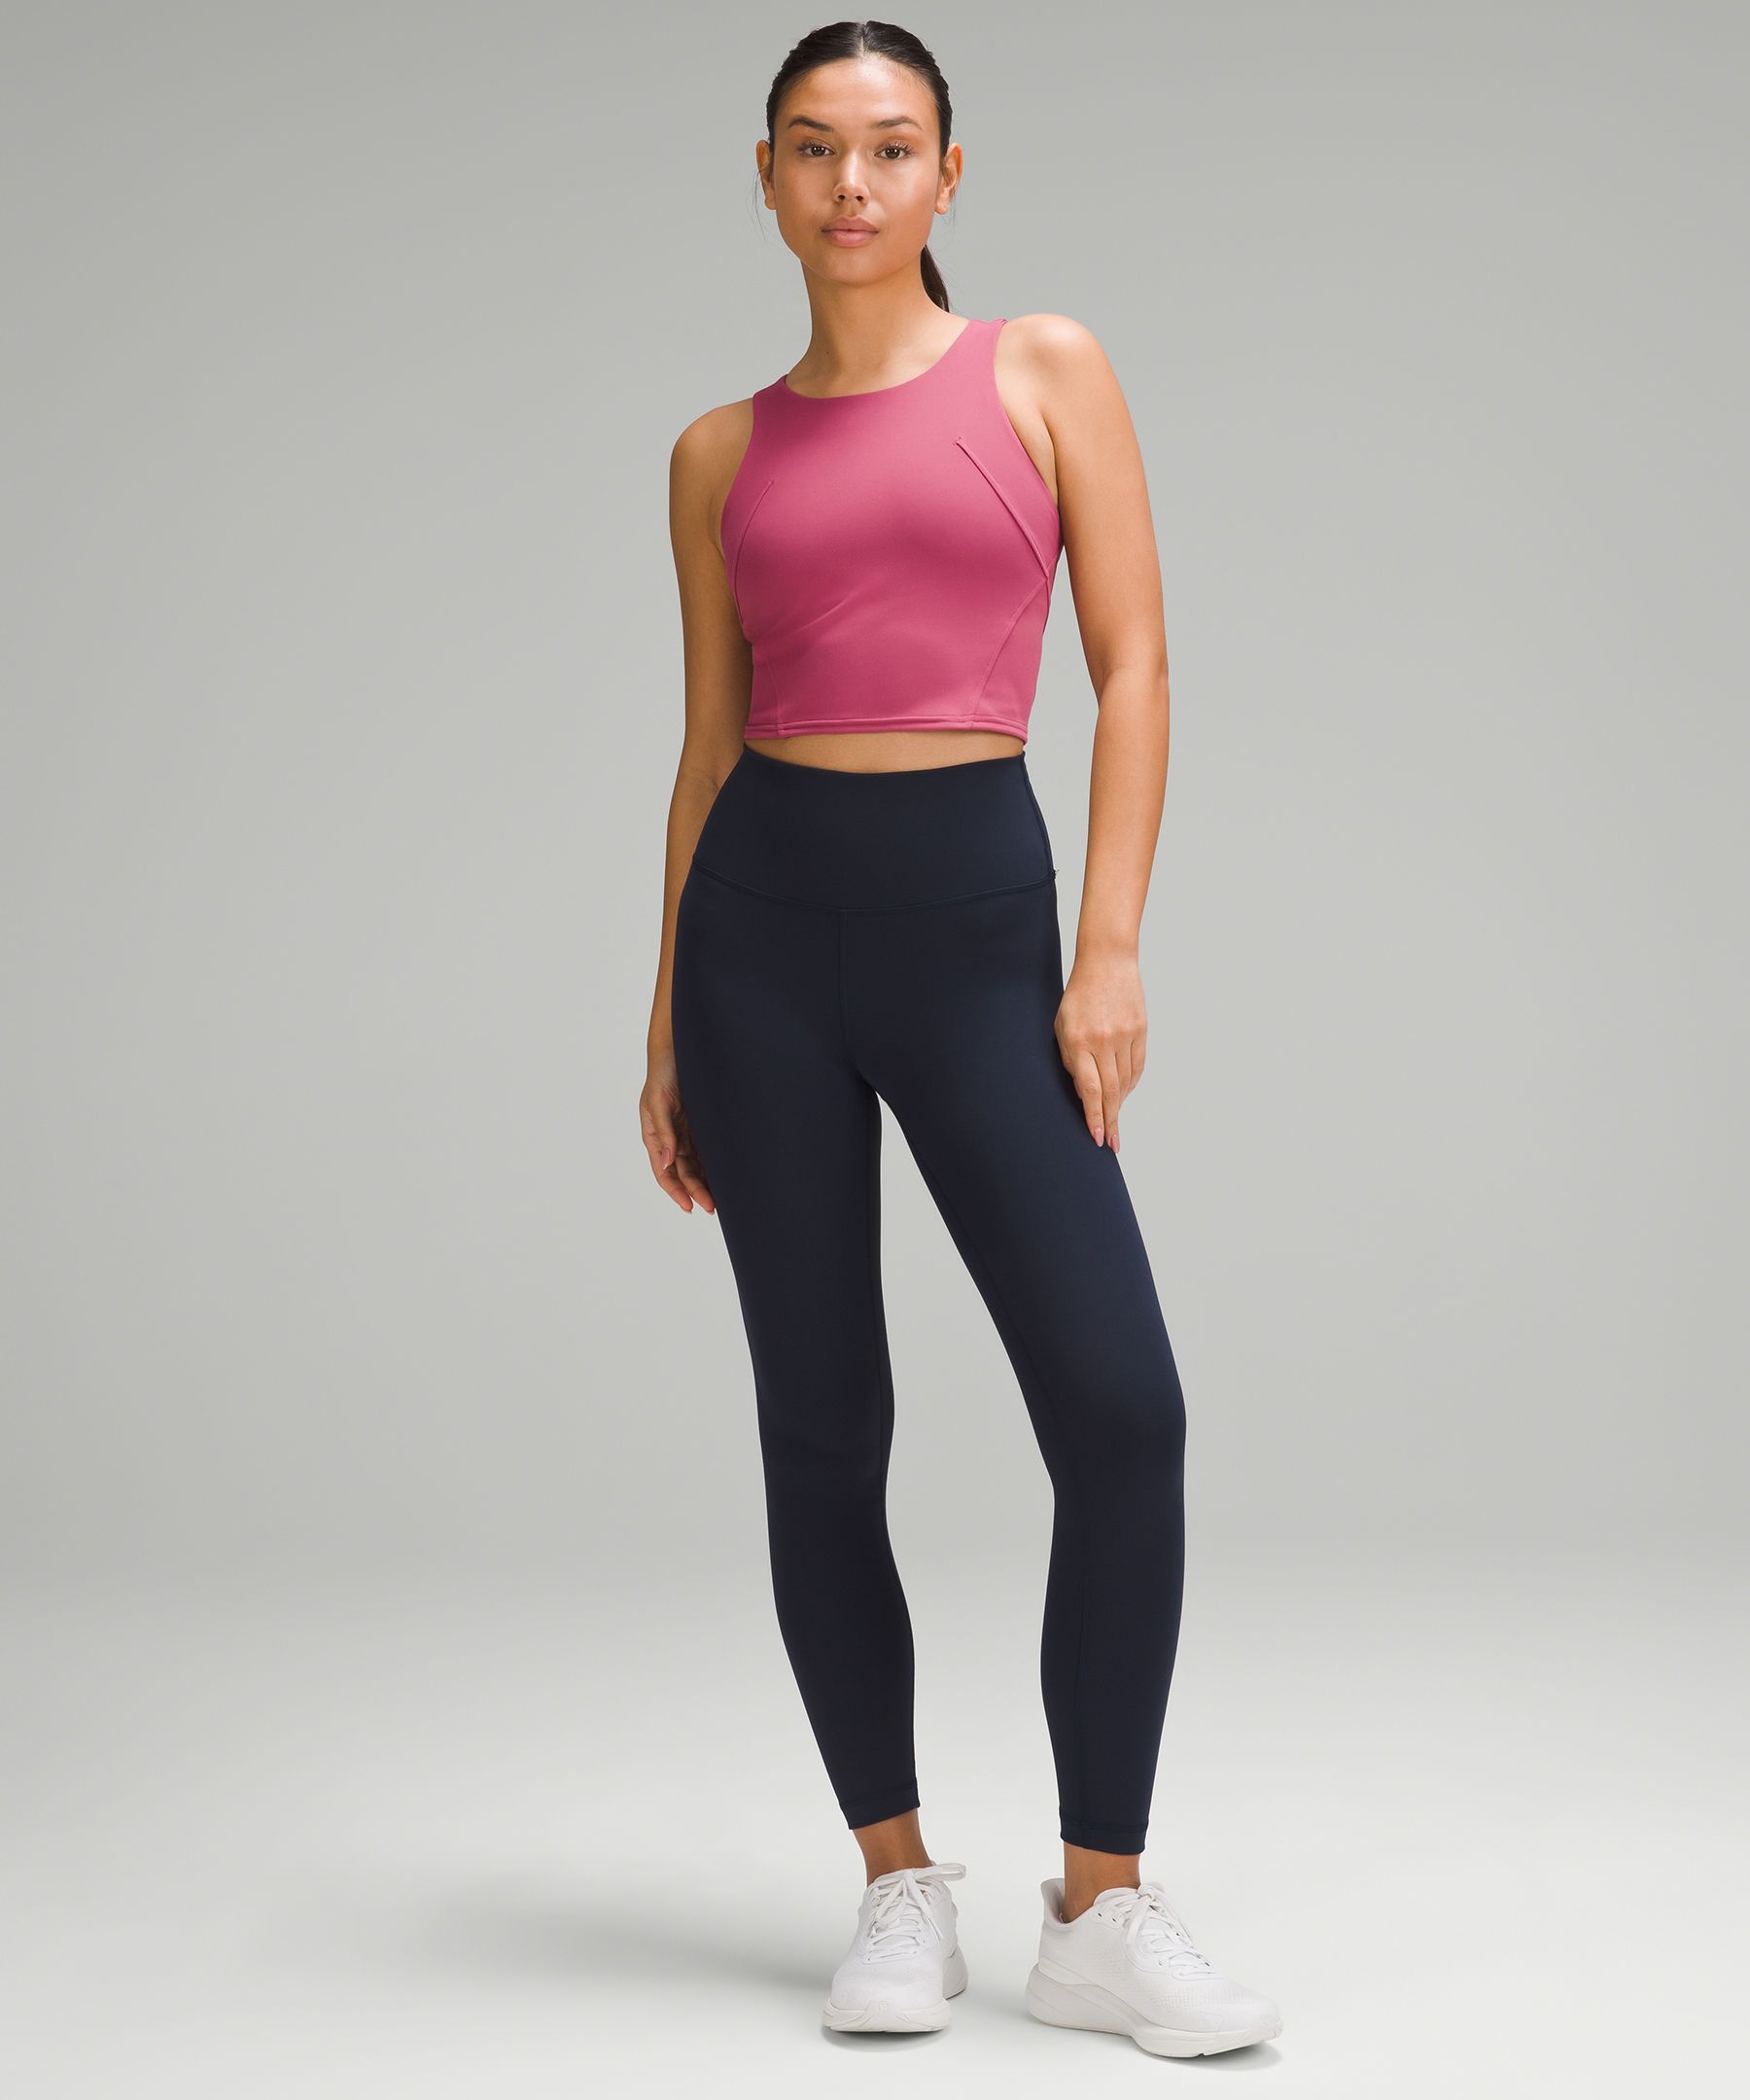 Lululemon Canada Pre Black Friday We Made Too Much Sales: Get Modal-Silk  Yoga Tank Top for $24 + FREE Shipping! - Canadian Freebies, Coupons, Deals,  Bargains, Flyers, Contests Canada Canadian Freebies, Coupons